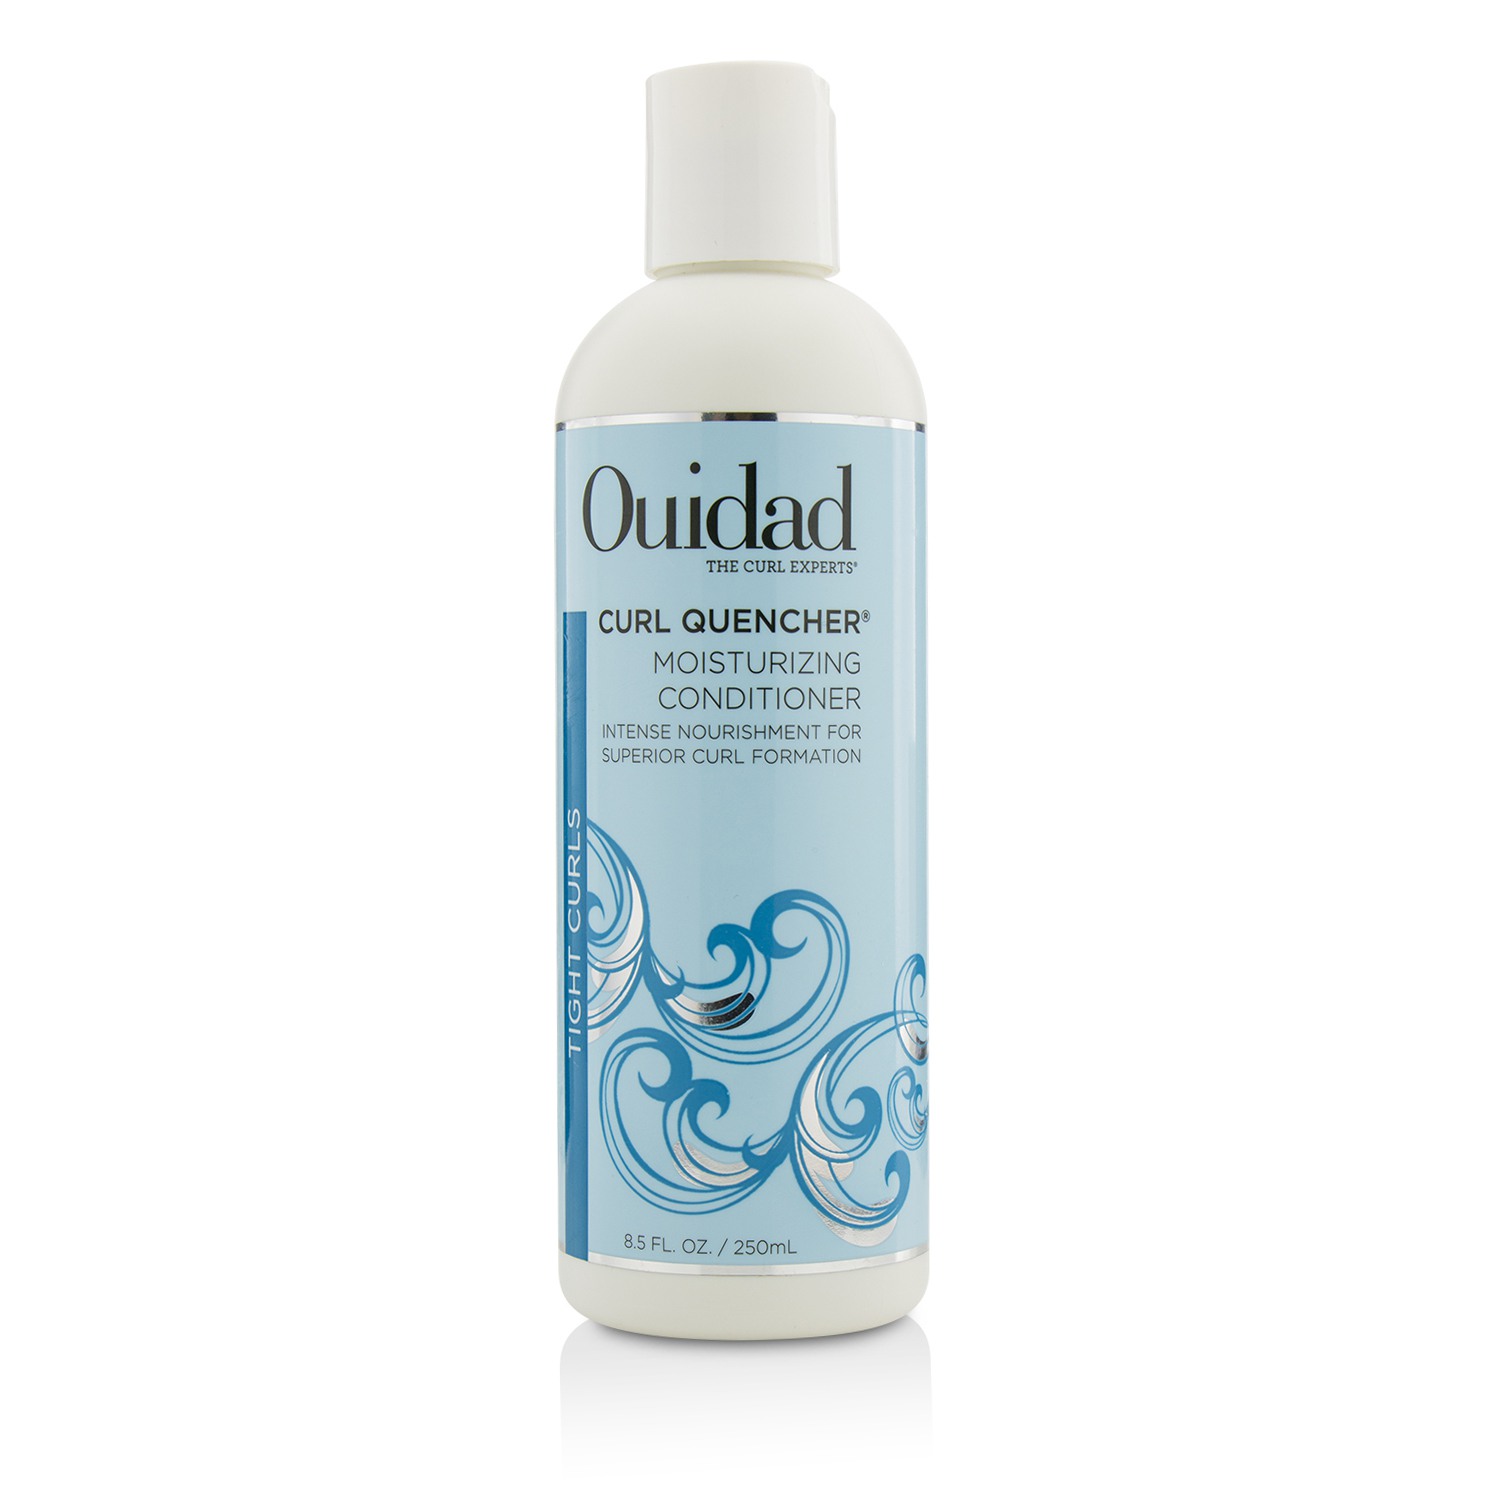 Curl Quencher Moisturizing Conditioner (Tight Curls) Ouidad Image